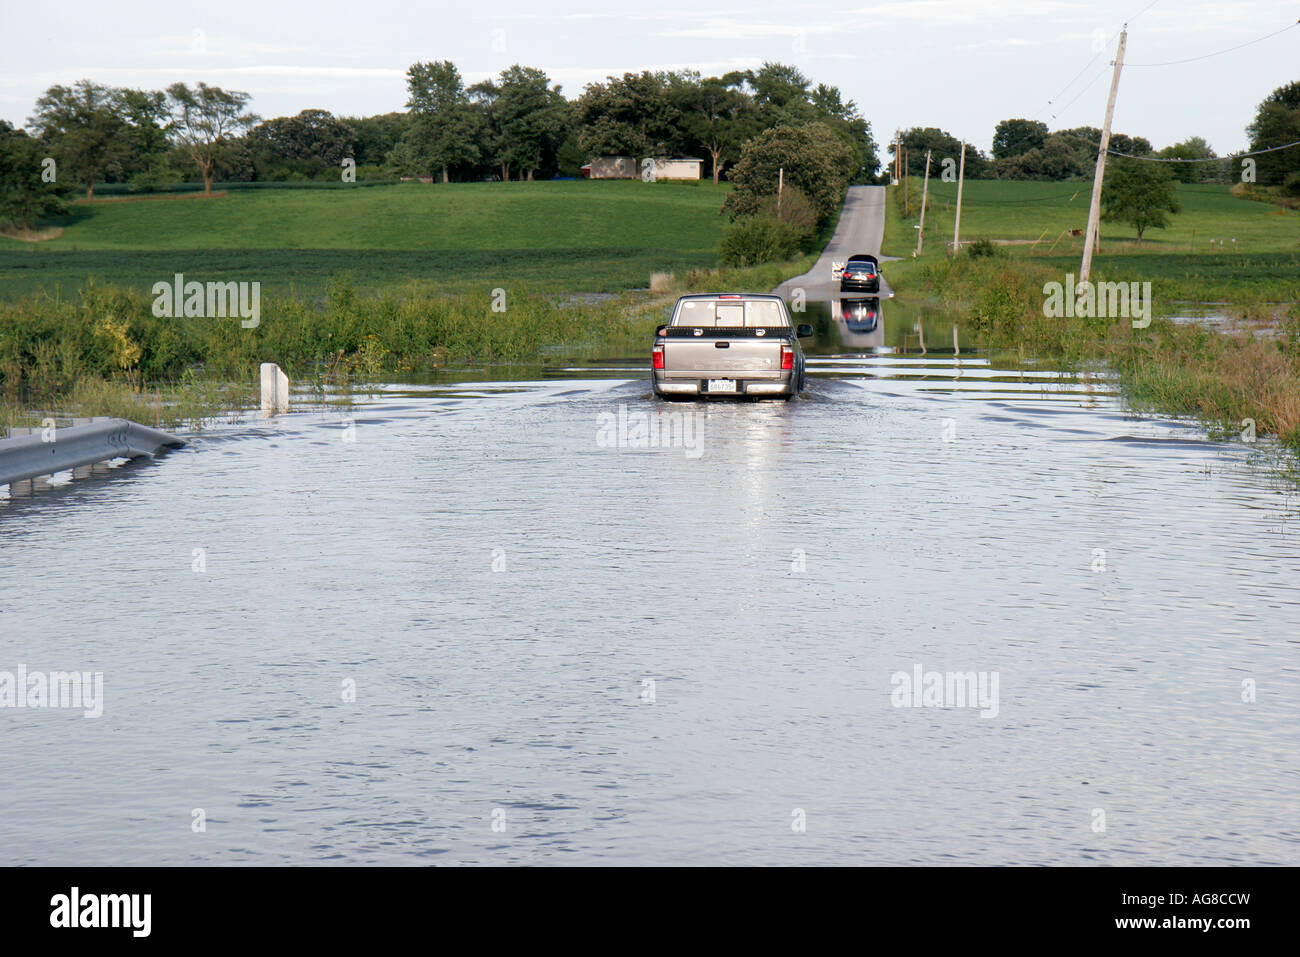 Indiana Lake County,Belshaw,West Creek,flooding,rural road,pickup truck,lorry,high water,IL070824015 Stock Photo